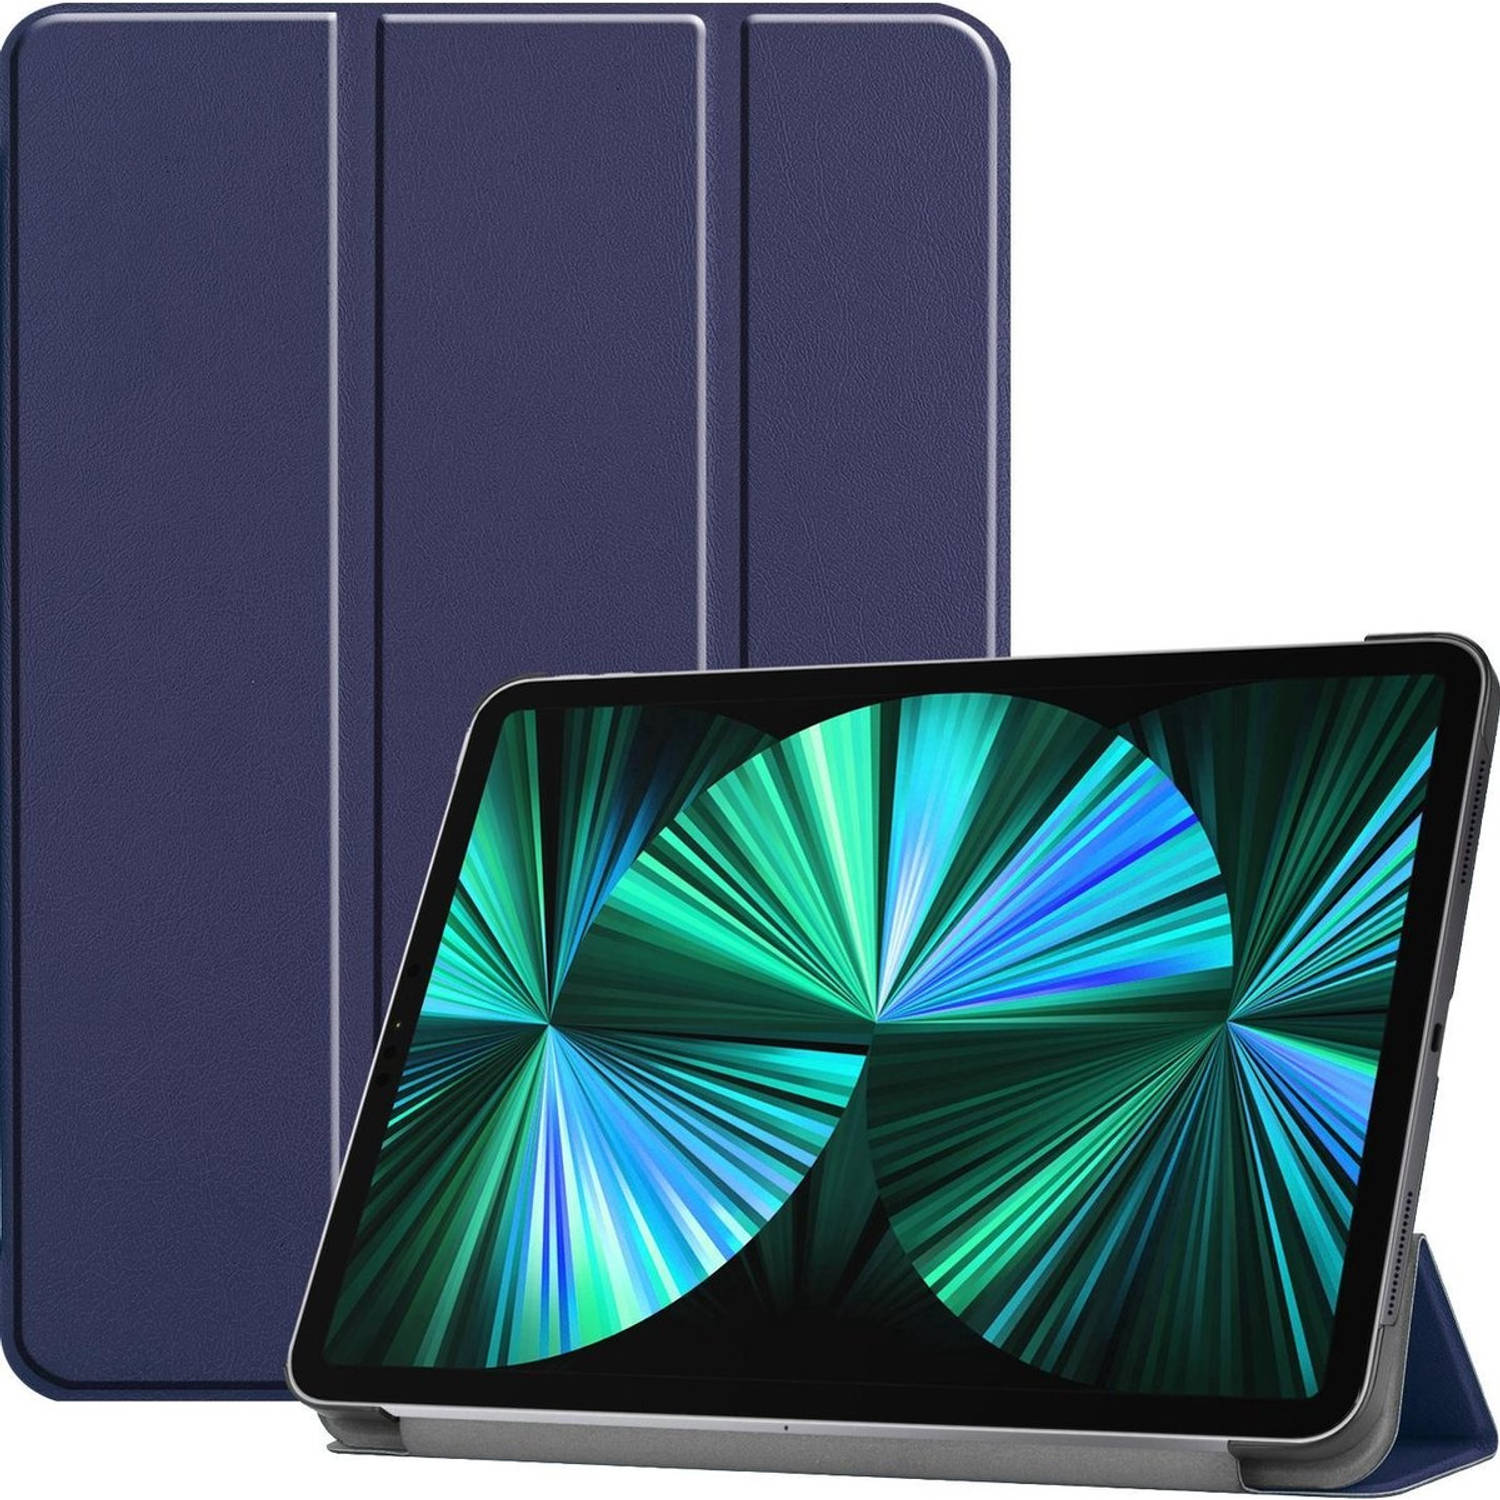 Basey Ipad Pro 2021 12,9 Inch Hoes Case Hoesje Donker Blauw Hardcover Book Case Cover